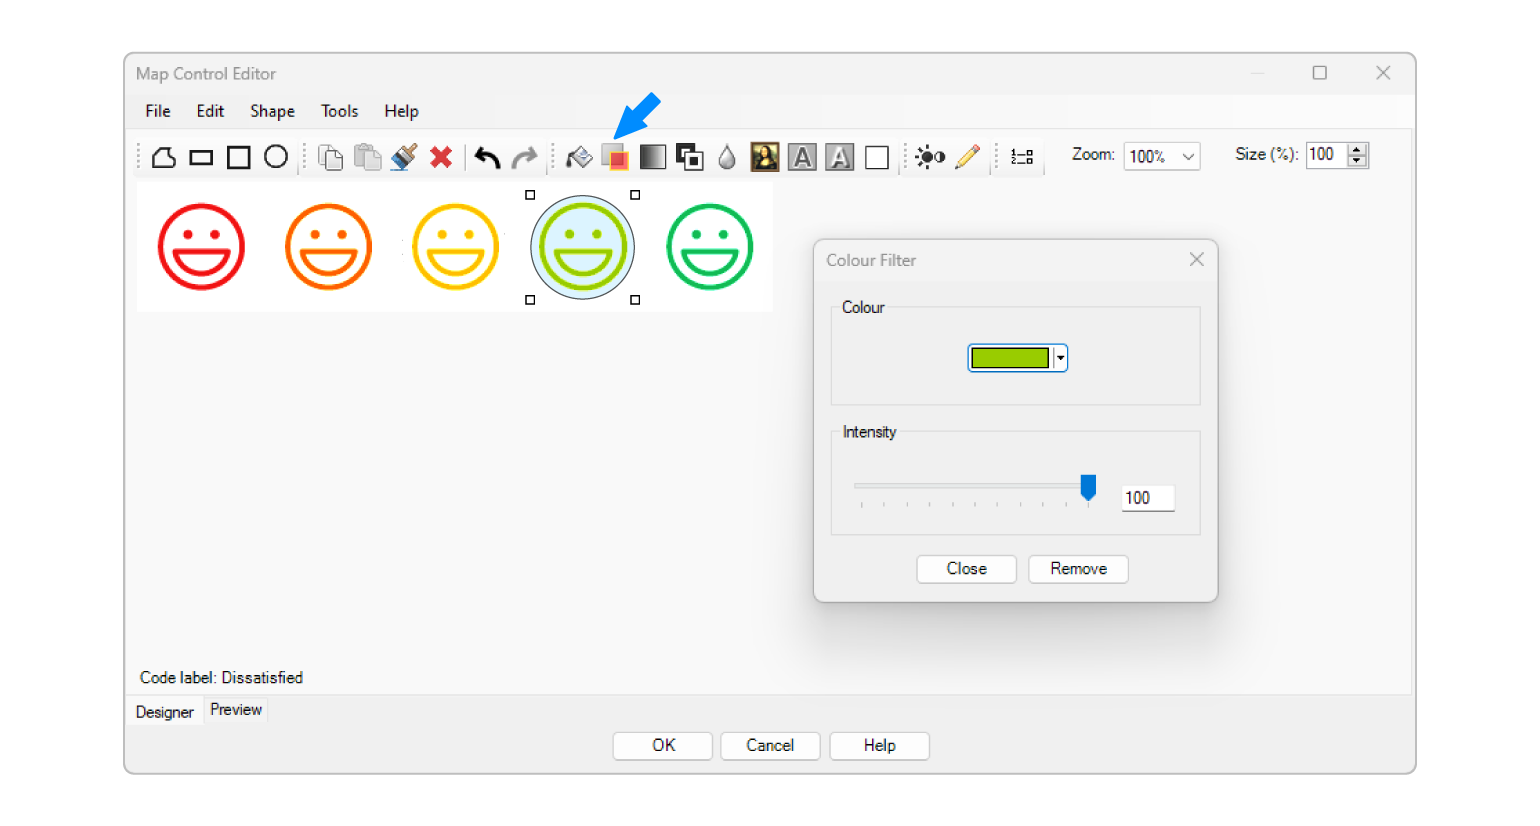 Colouring rating scale images in Snap XMP Desktop Map Control Editor screenshot